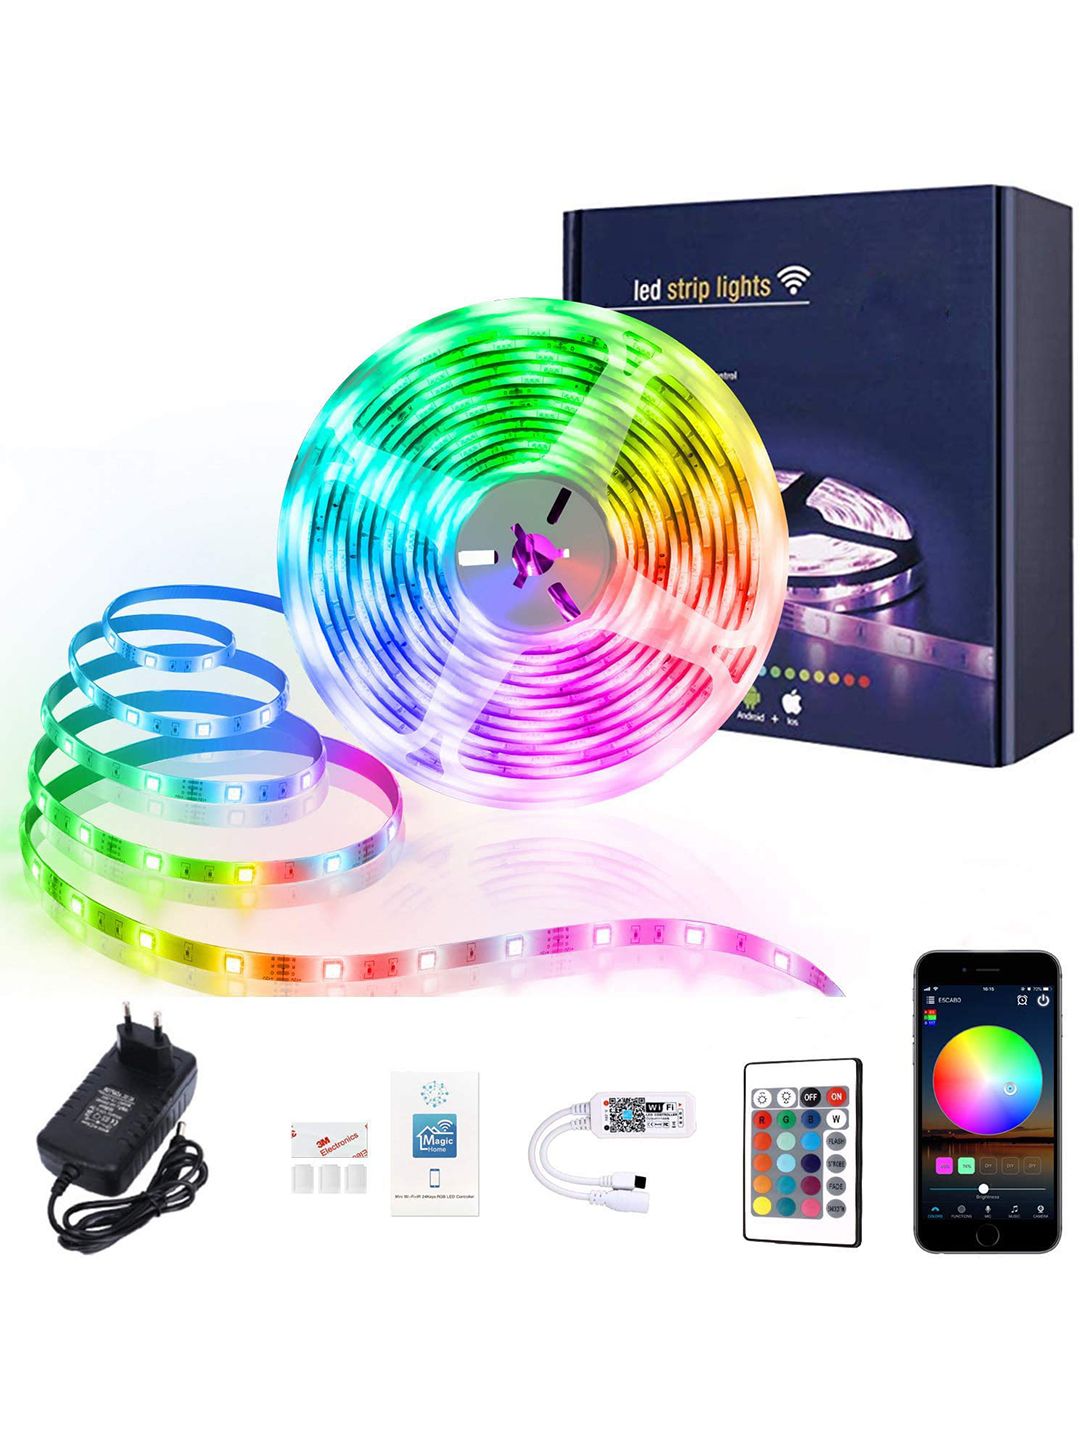 XERGY Multi-Coloured LED Strip Lights with RGB 150 Smart Wi-Fi Control & IR Remote Price in India